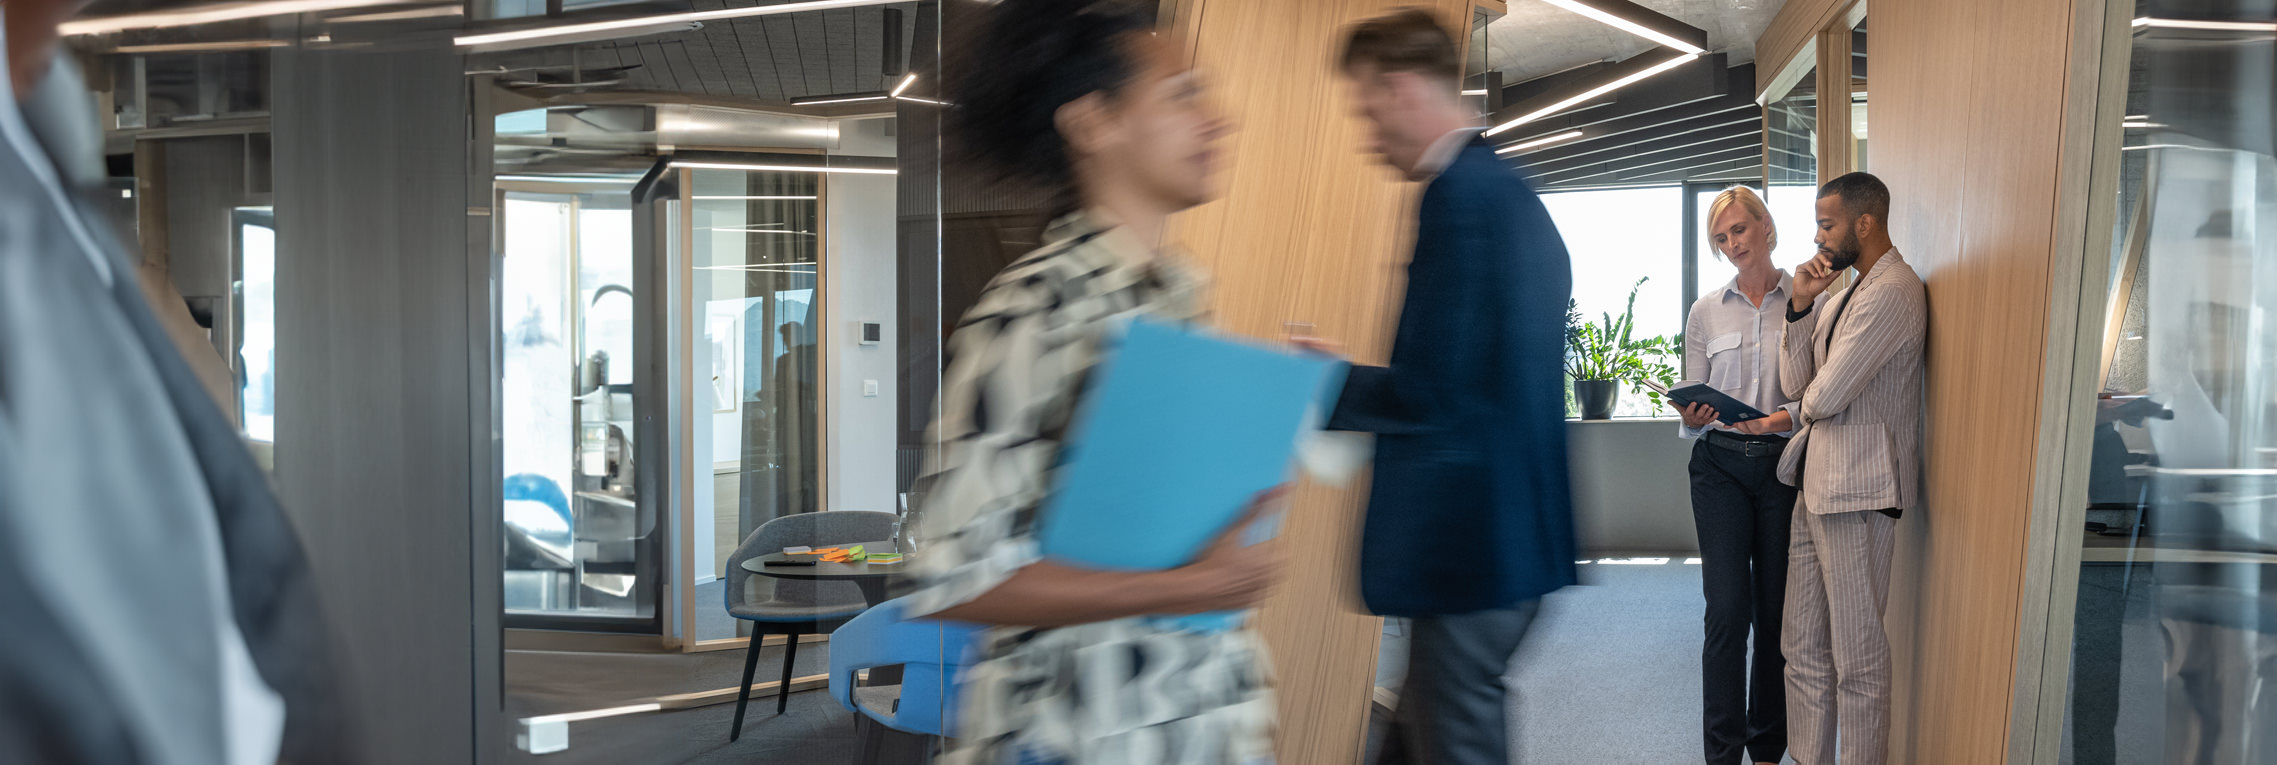 Two employees blurred in movement while two other employees focus on an opened book.